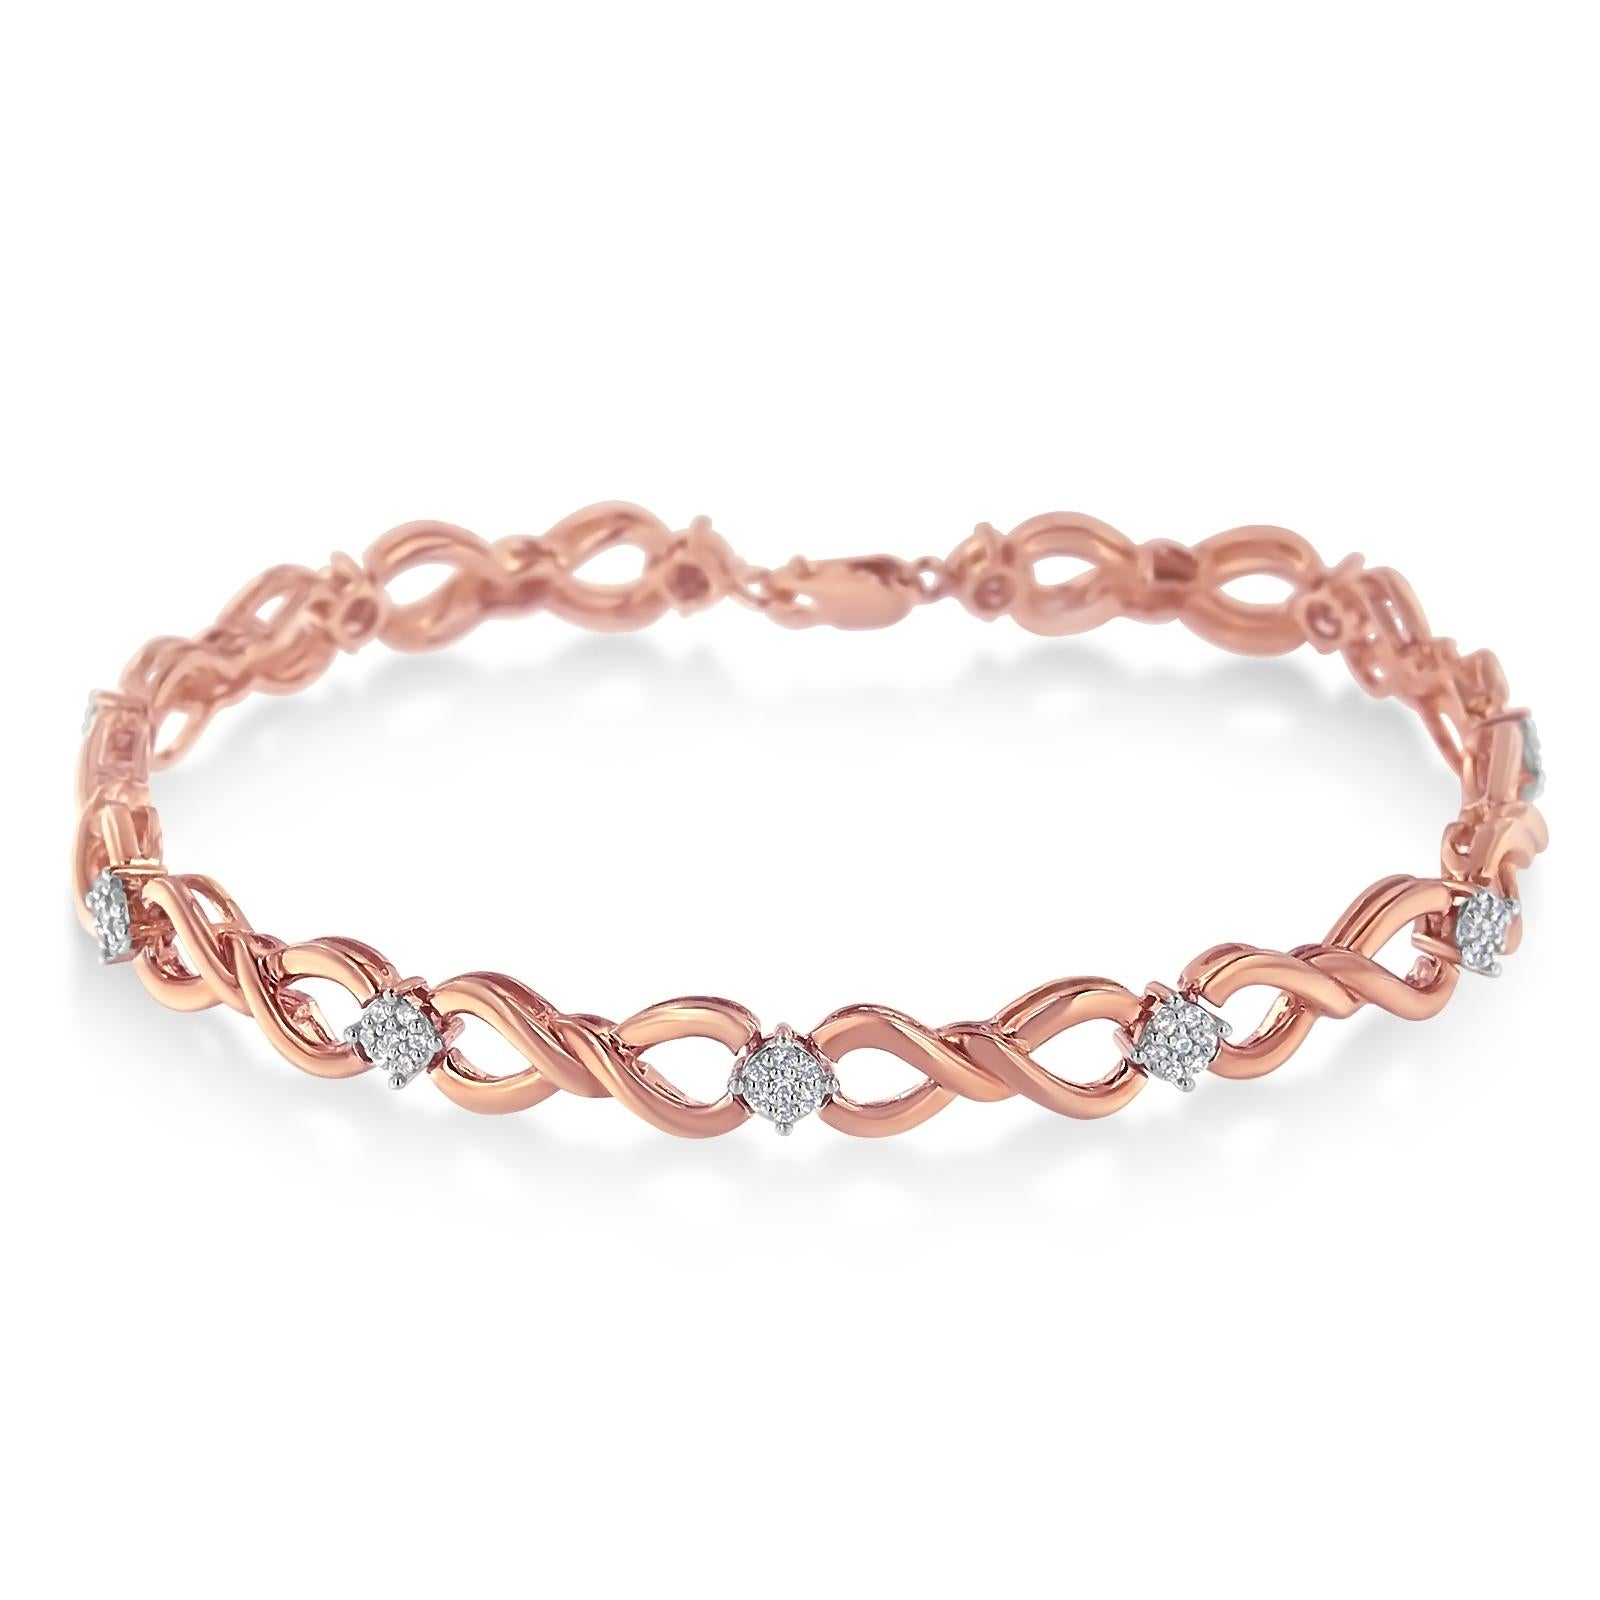 Give a charming appeal to your look by wearing this gorgeous tennis bracelet. Fashioned out of pure rose gold, the bracelet features intertwining ribbons, puncuated with sparkling diamond clusters that are adorned with shimmering round cut diamonds.